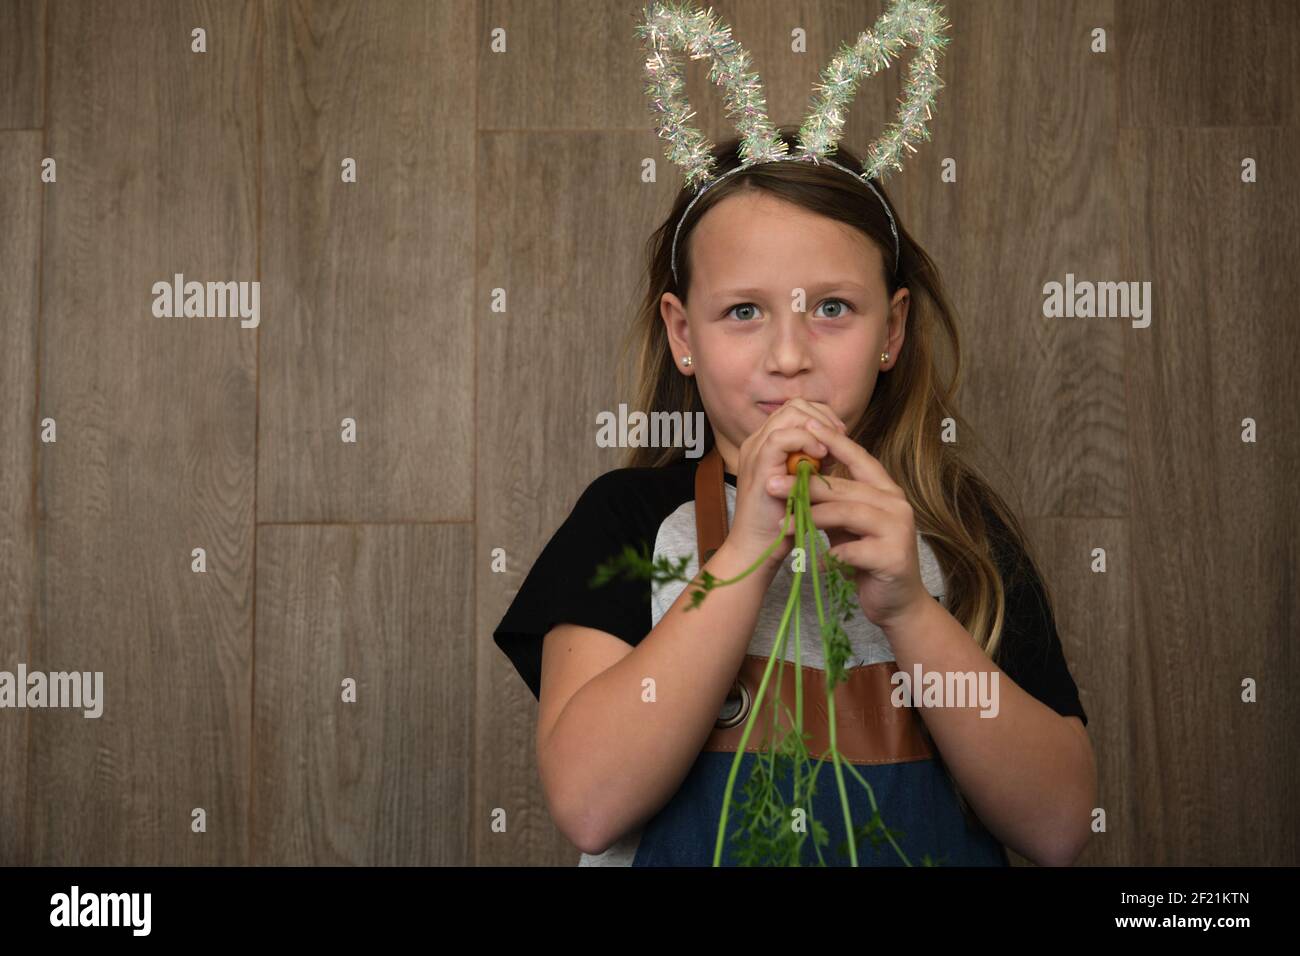 a girl with bunny ears nibbles on a carrot Stock Photo